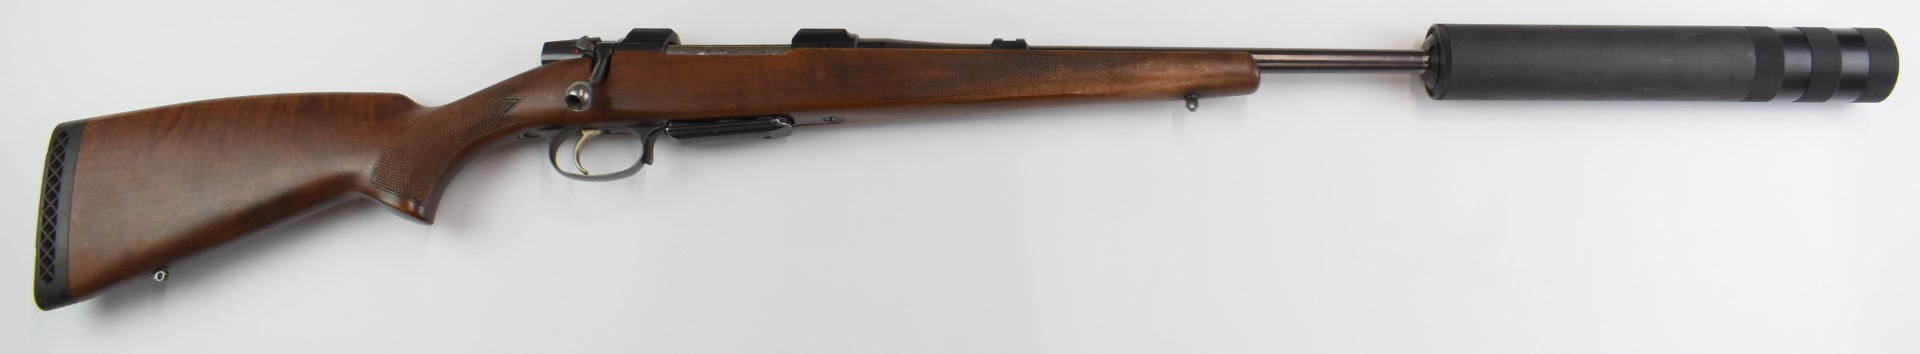 BRNO CZ 537 .243 bolt-action rifle with chequered semi-pistol grip and forend, raised cheek-piece, - Image 4 of 20